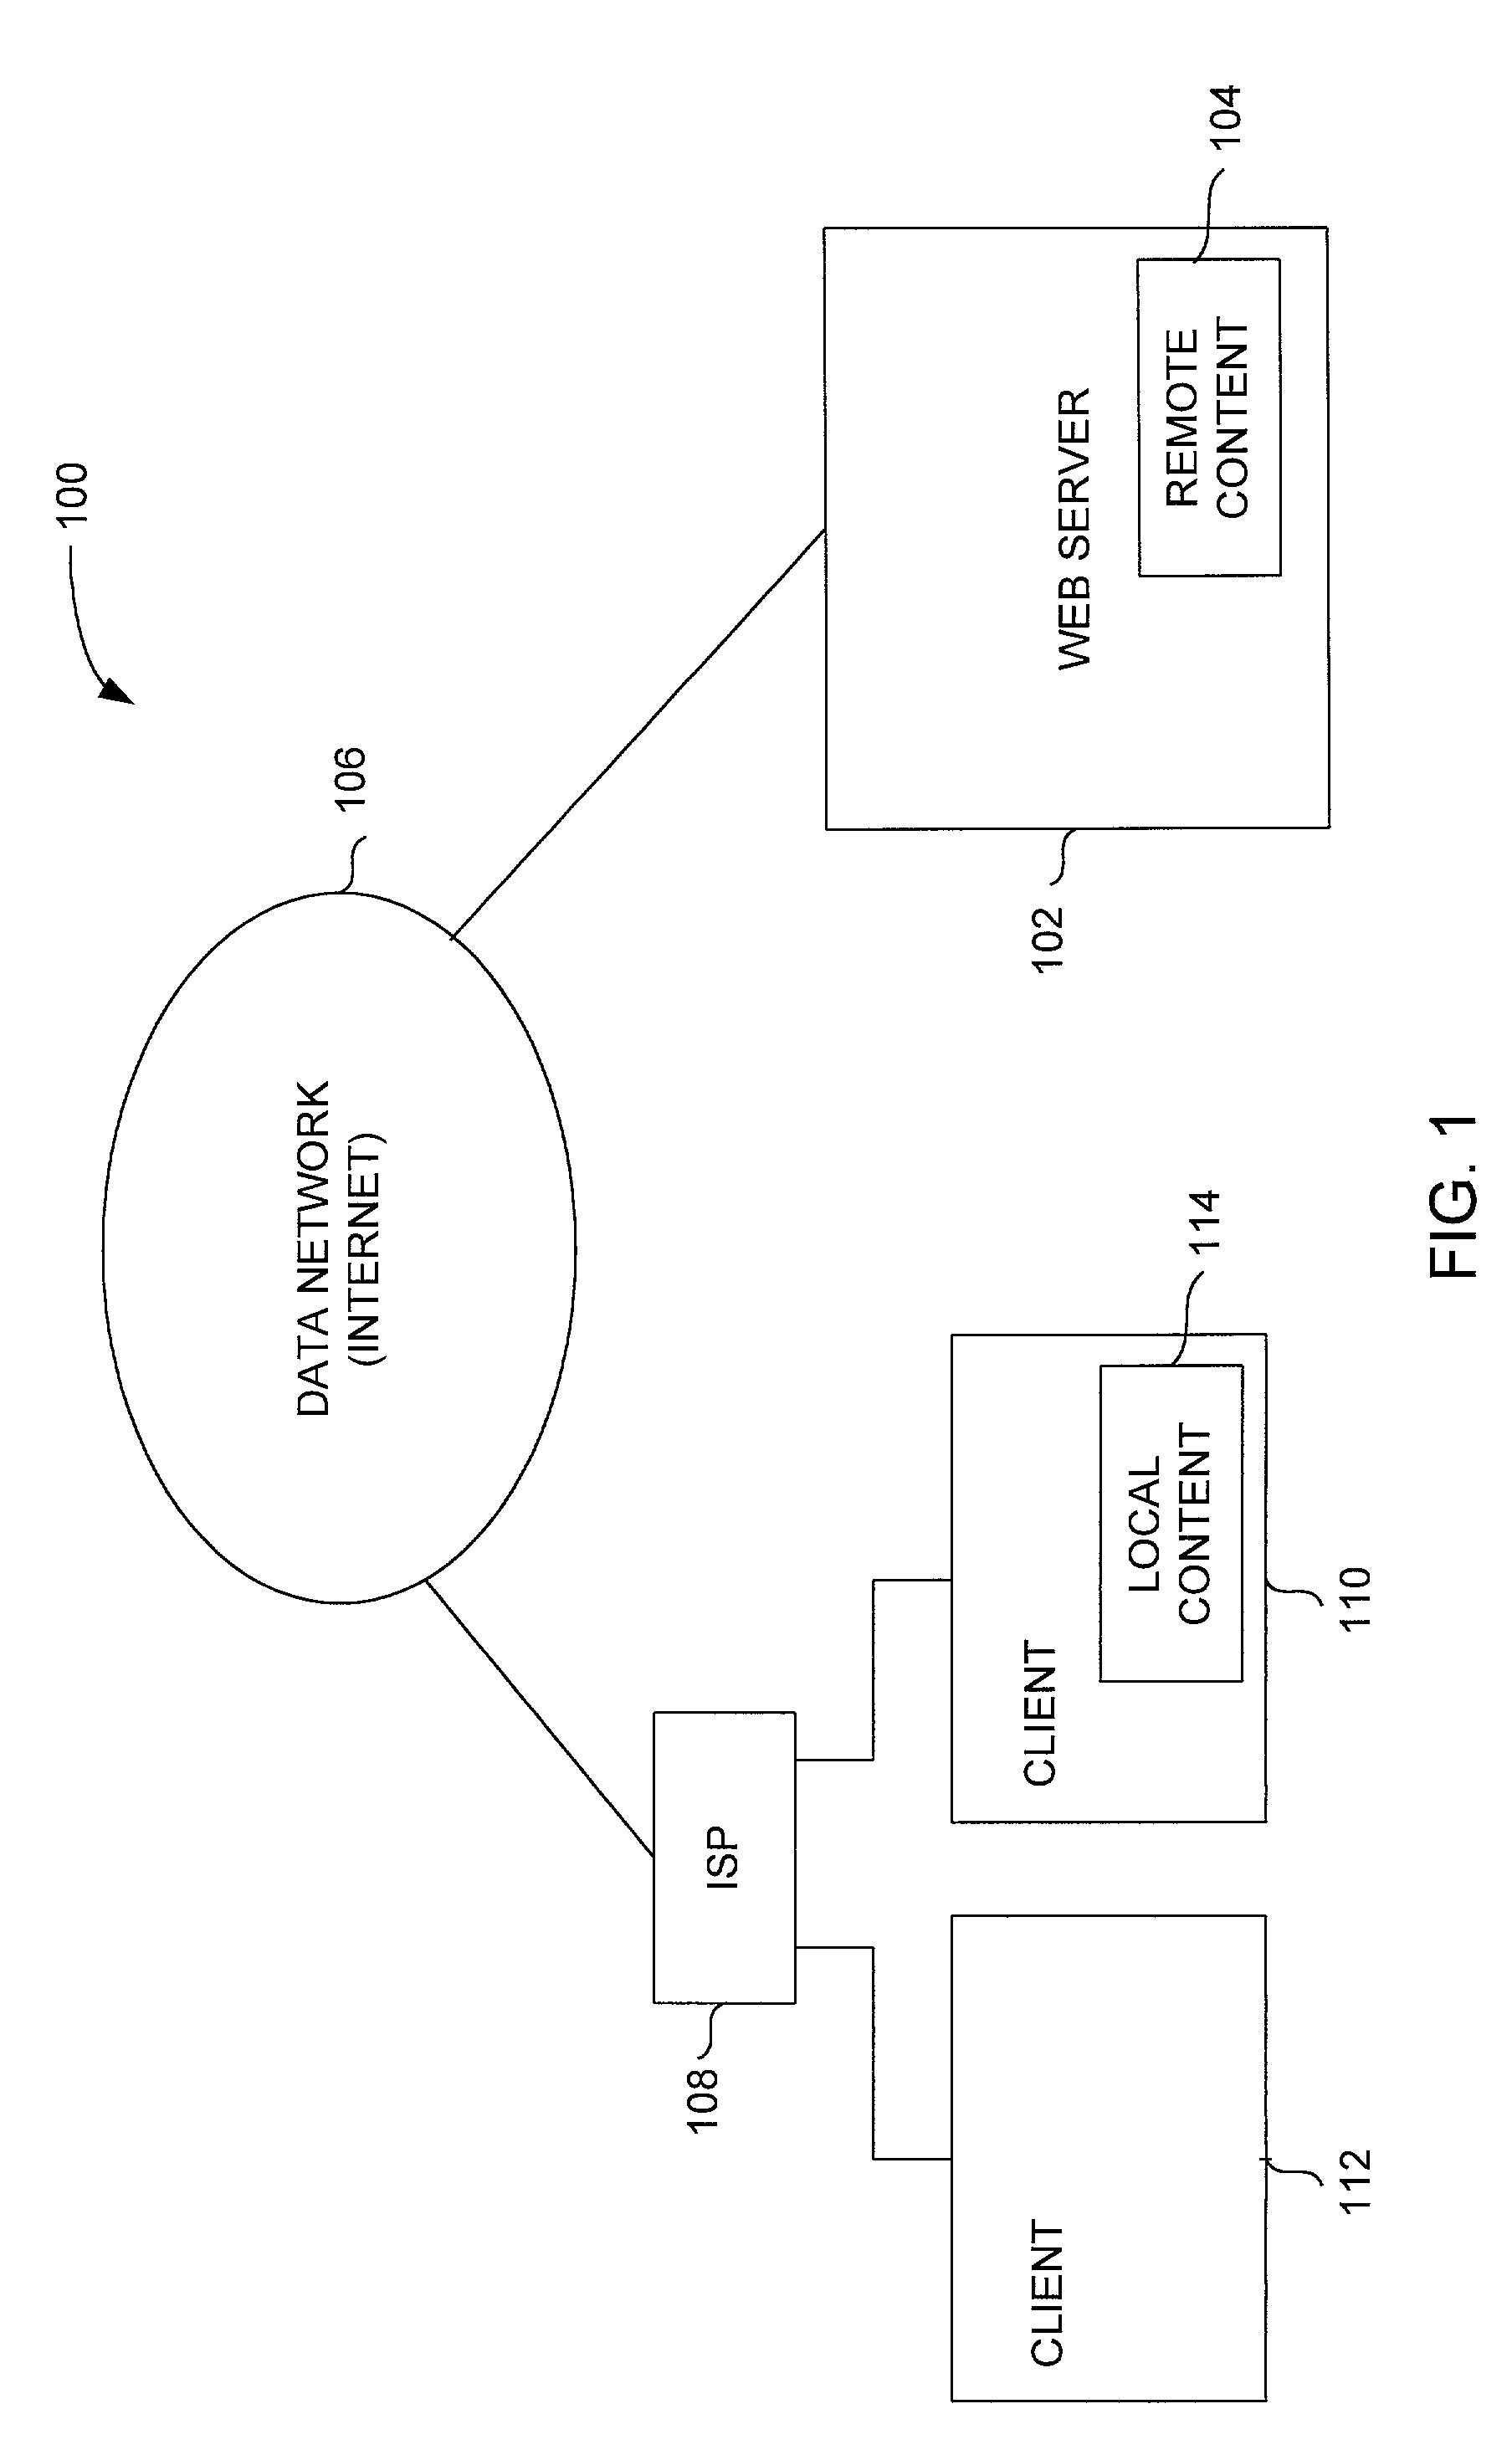 Method and system for facilitating usage of local content at client machine